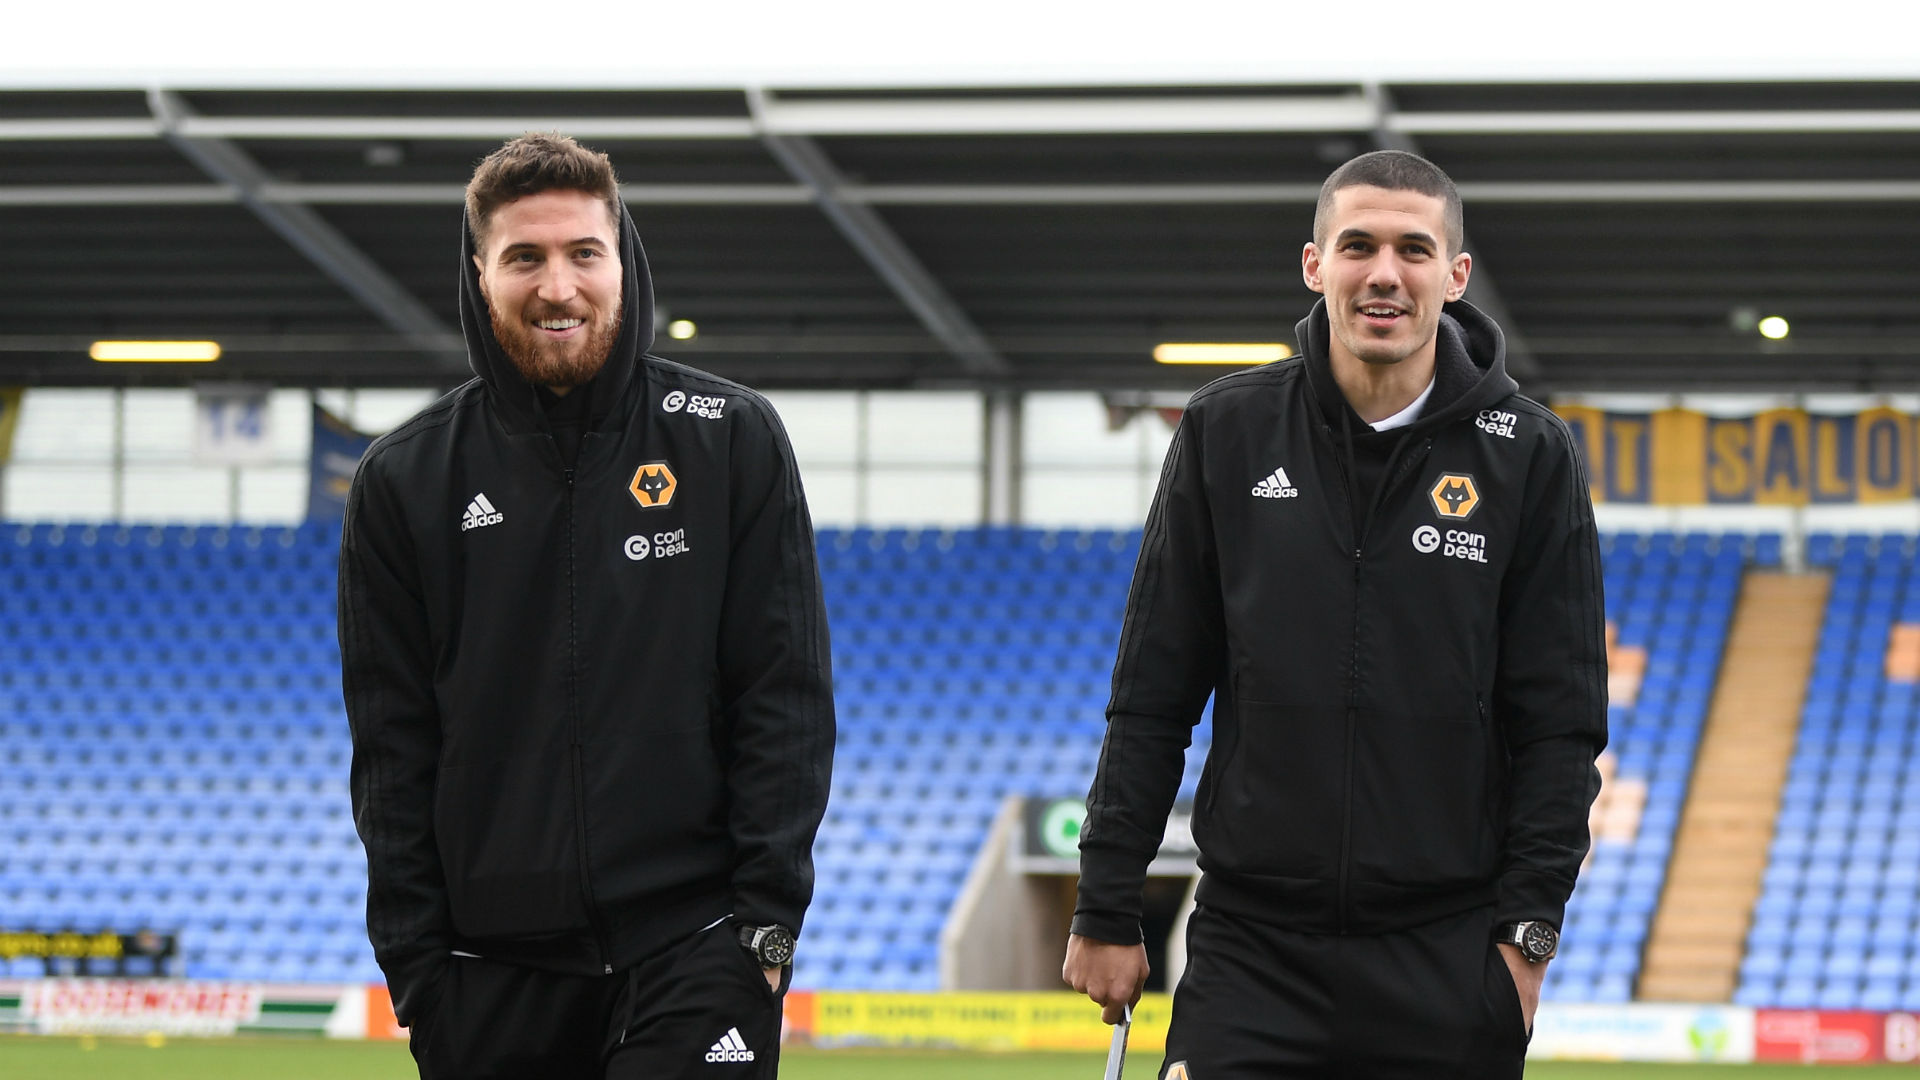 Wolves have handed four-and-a-half-year contract extensions to club captain Conor Coady and Republic of Ireland wing-back Matt Doherty.